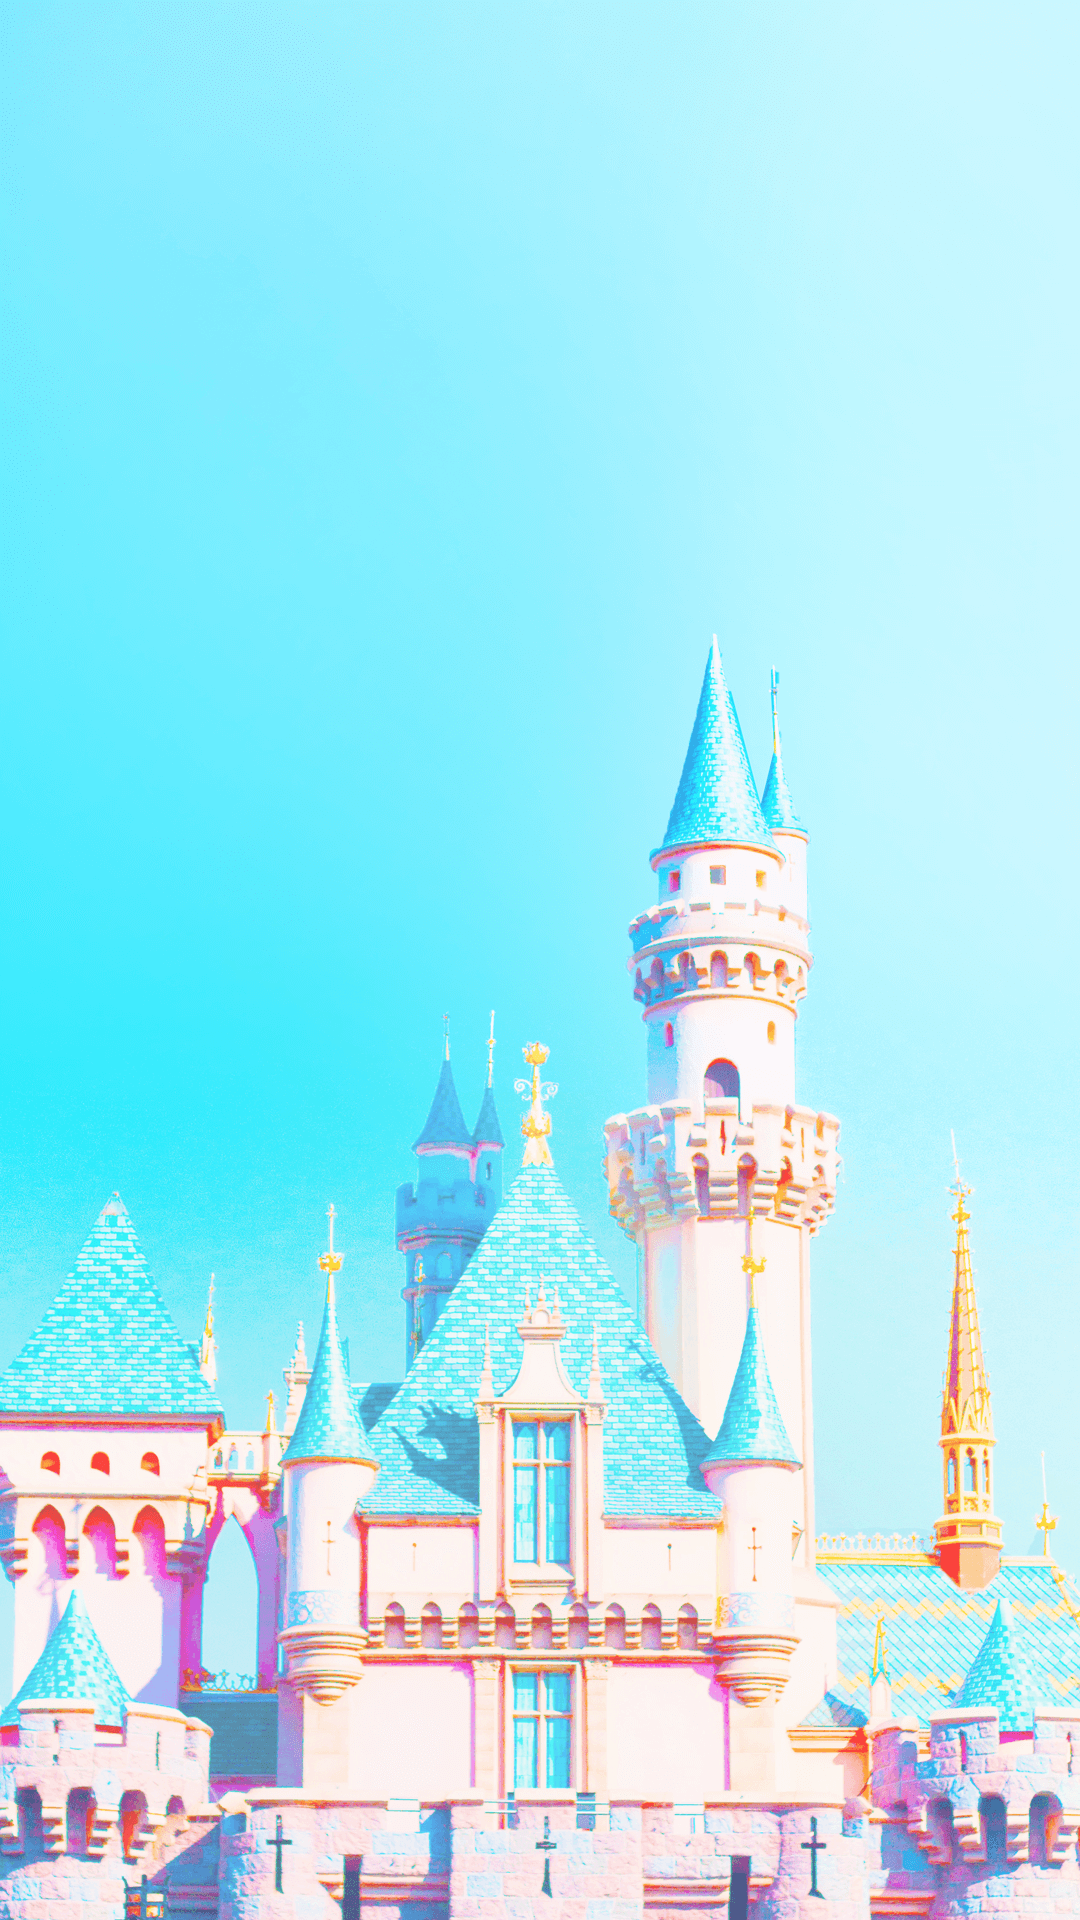 A castle with blue and pink colors - Disneyland